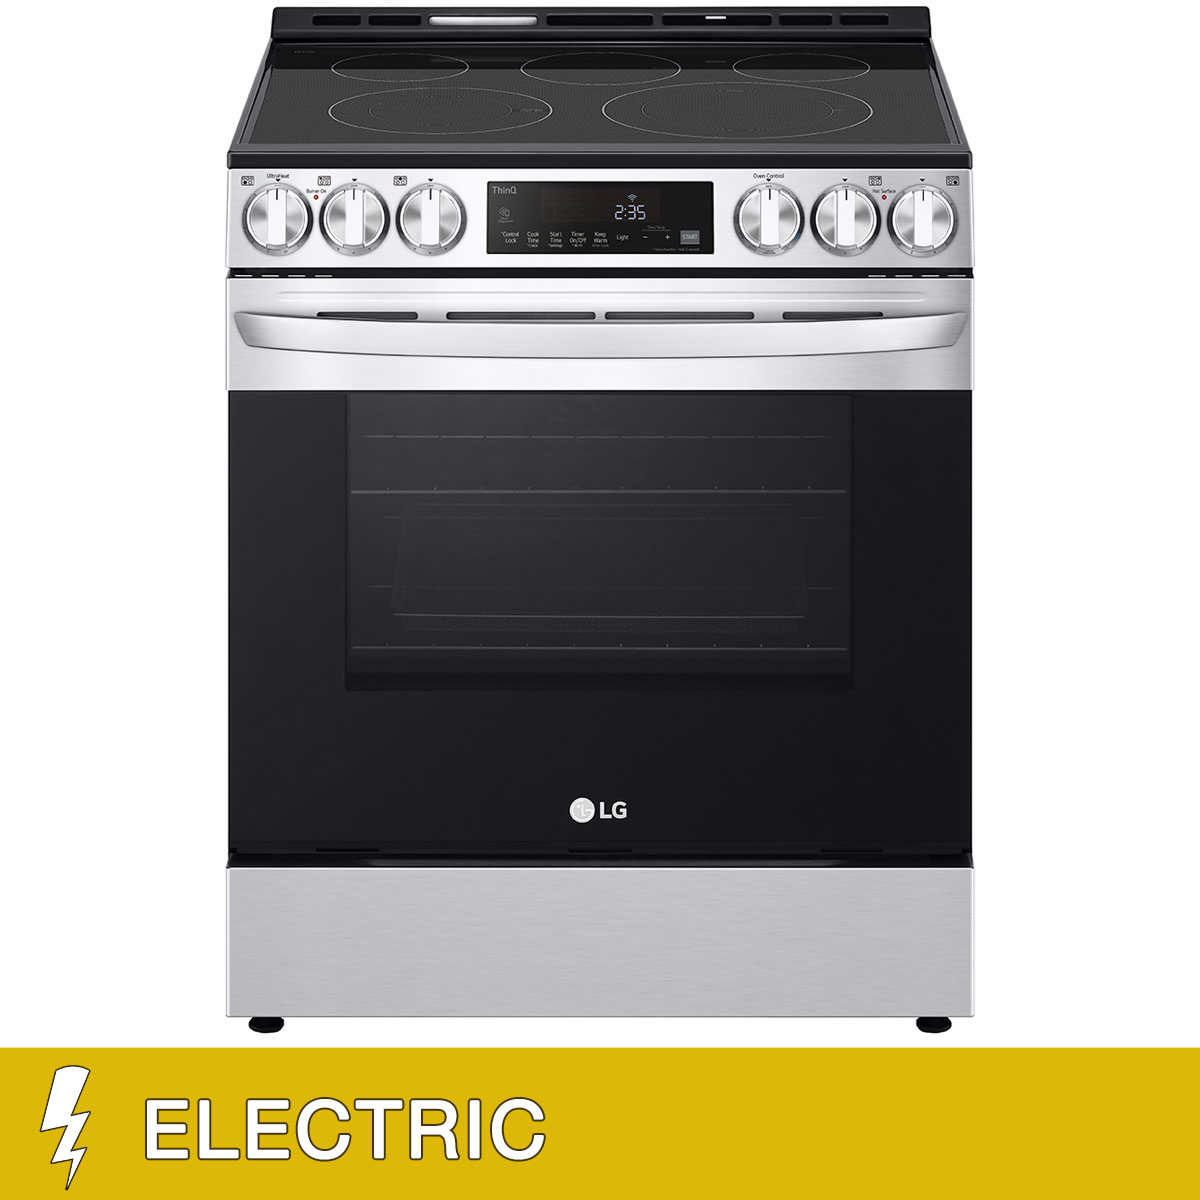 LG 6.3 cu. ft. Smart ELECTRIC Slide-In Range with Convection, Air Fry and EasyClean - $999.99